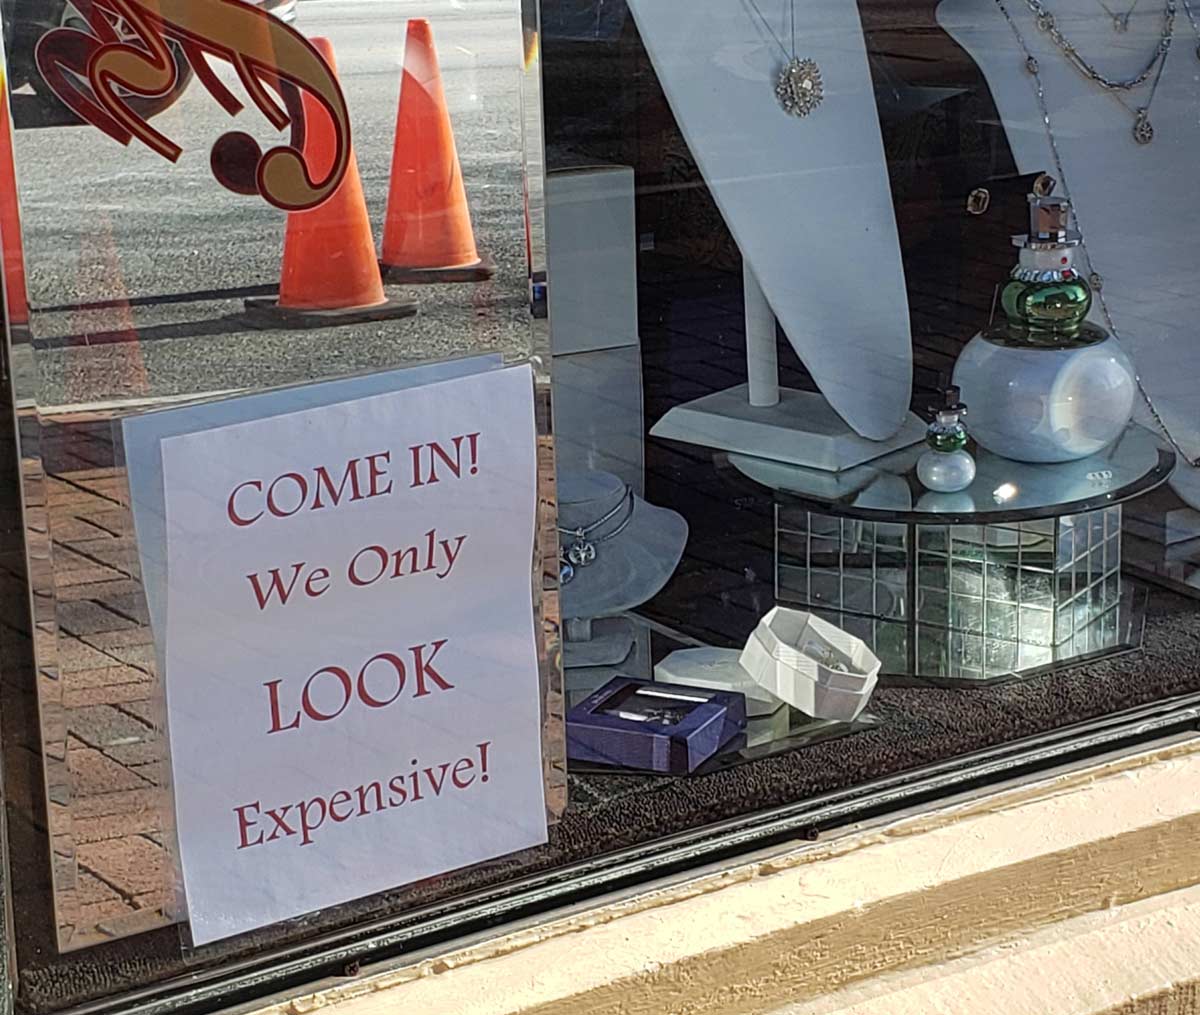 A jewelry store I walked past today had this sign up